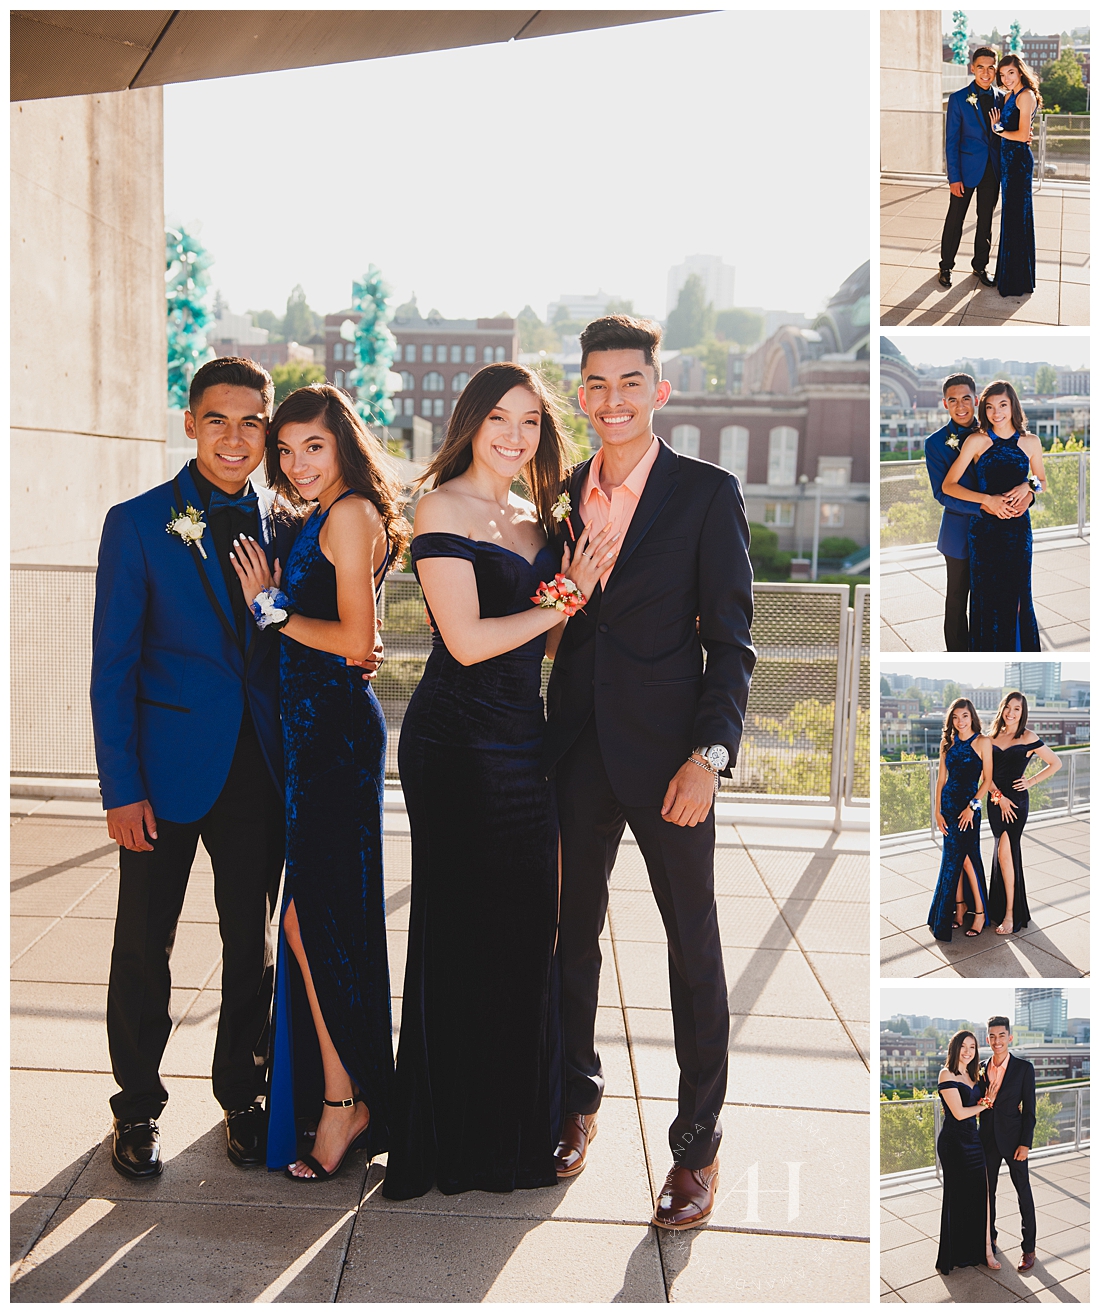 Prom double date portraits for high school seniors photographed by Tacoma senior photographer Amanda Howse